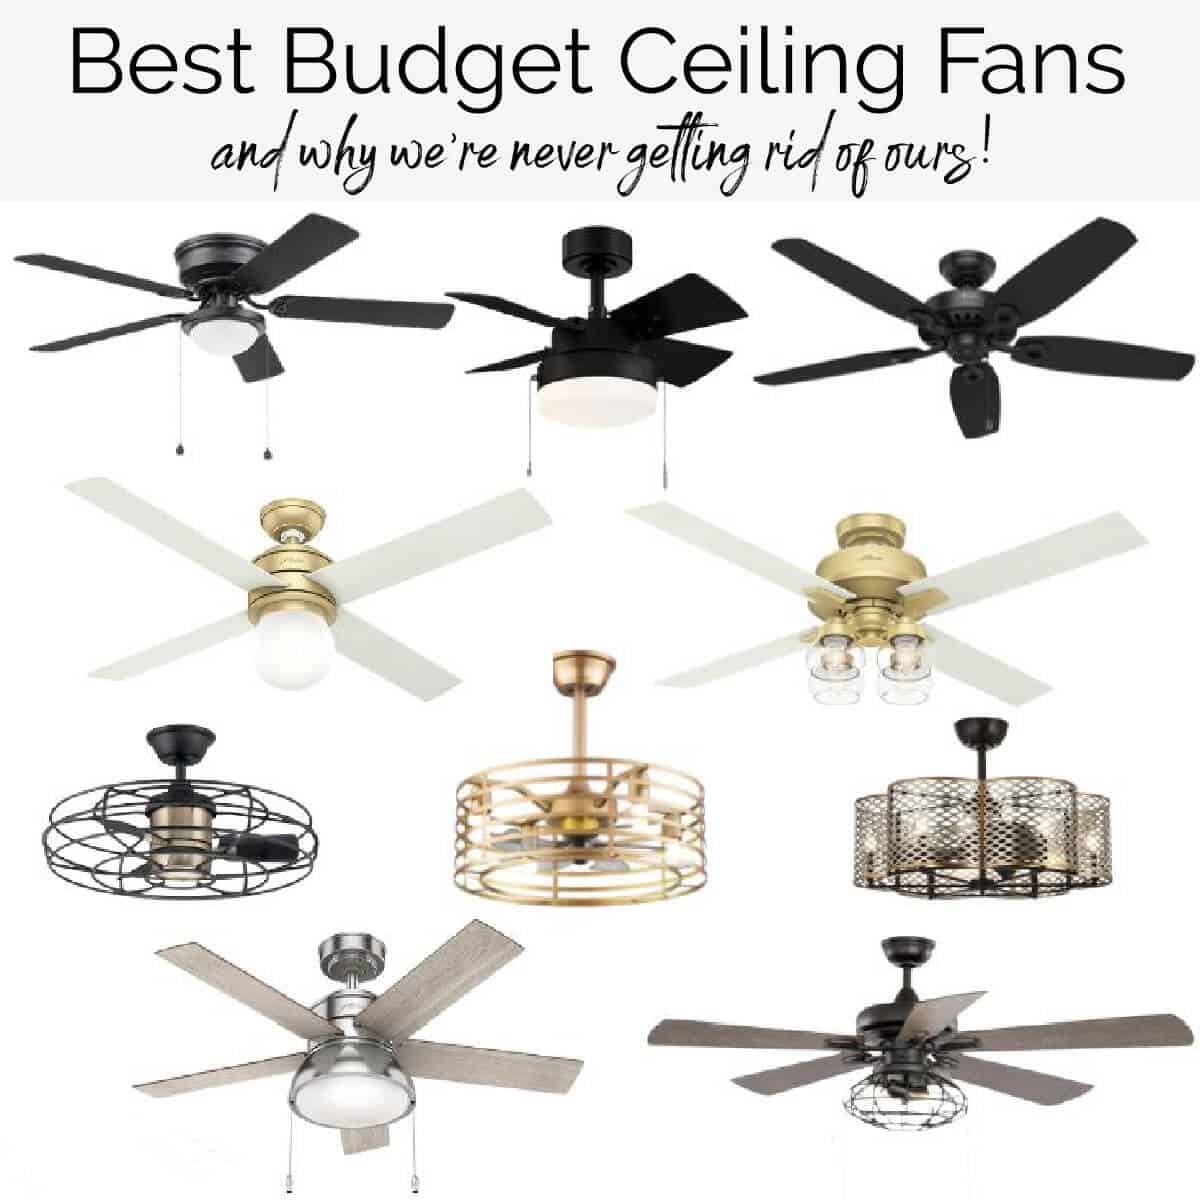 Best Budget Ceiling Fans and Why We’ll Never Get Rid of Ours!